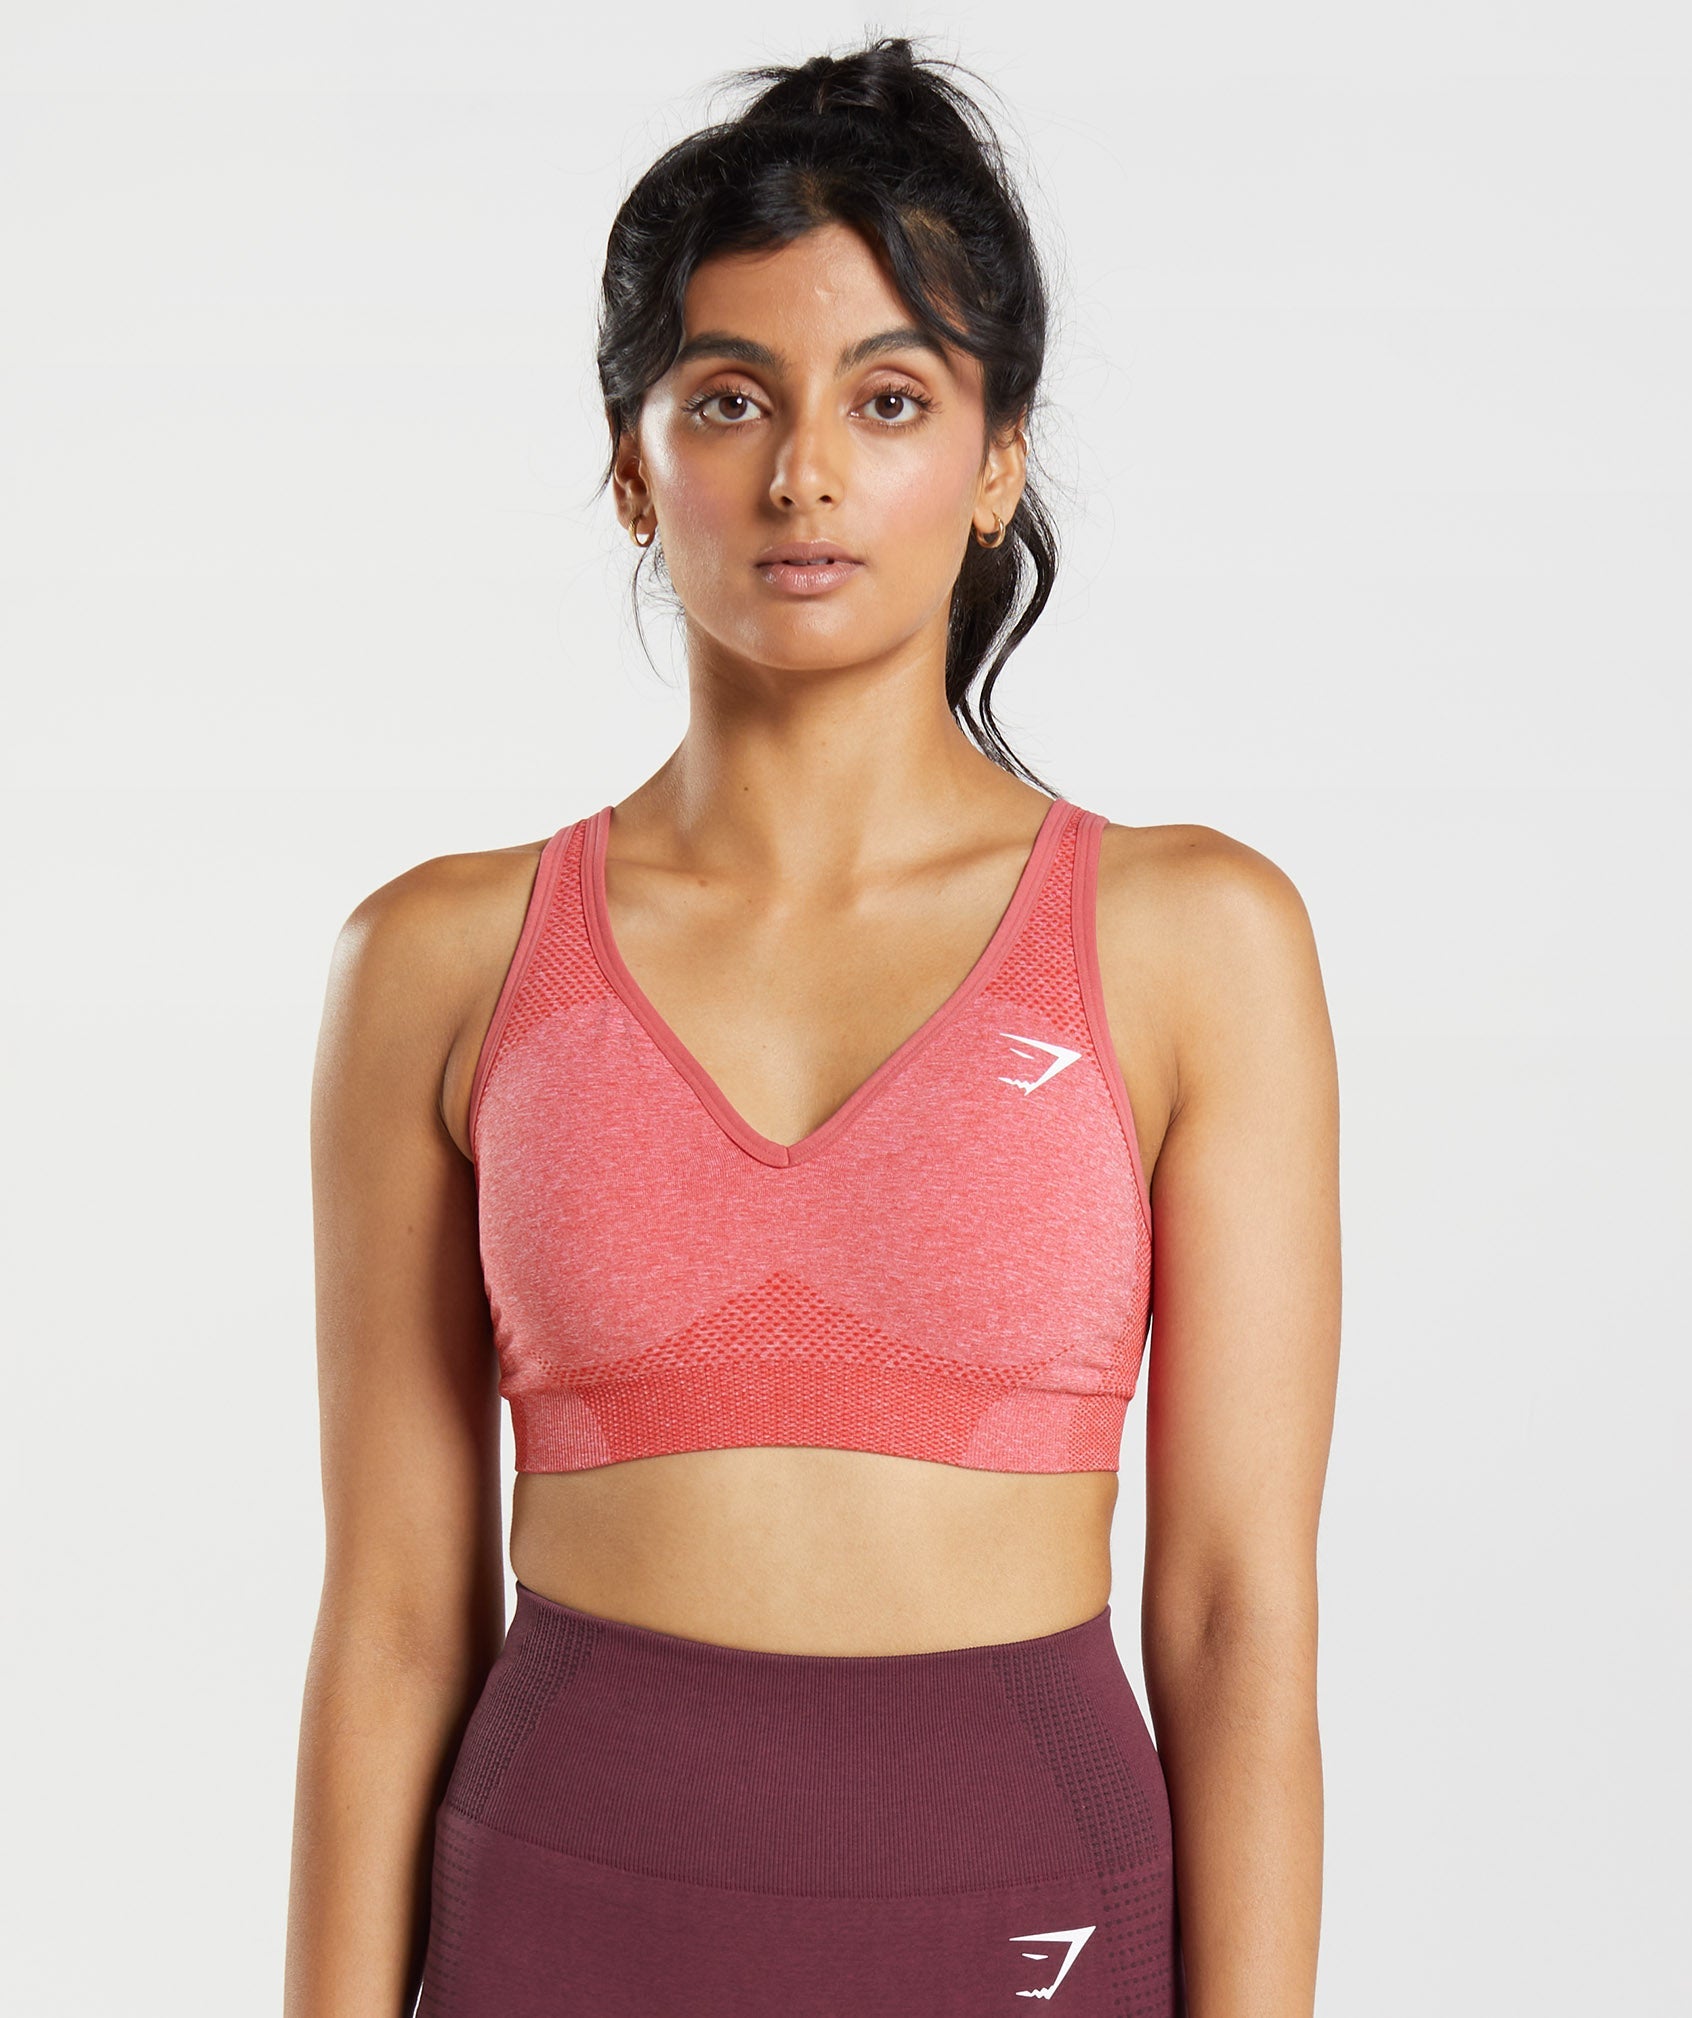 Gymshark Legacy Sports Bra Red Size XS - $29 (35% Off Retail